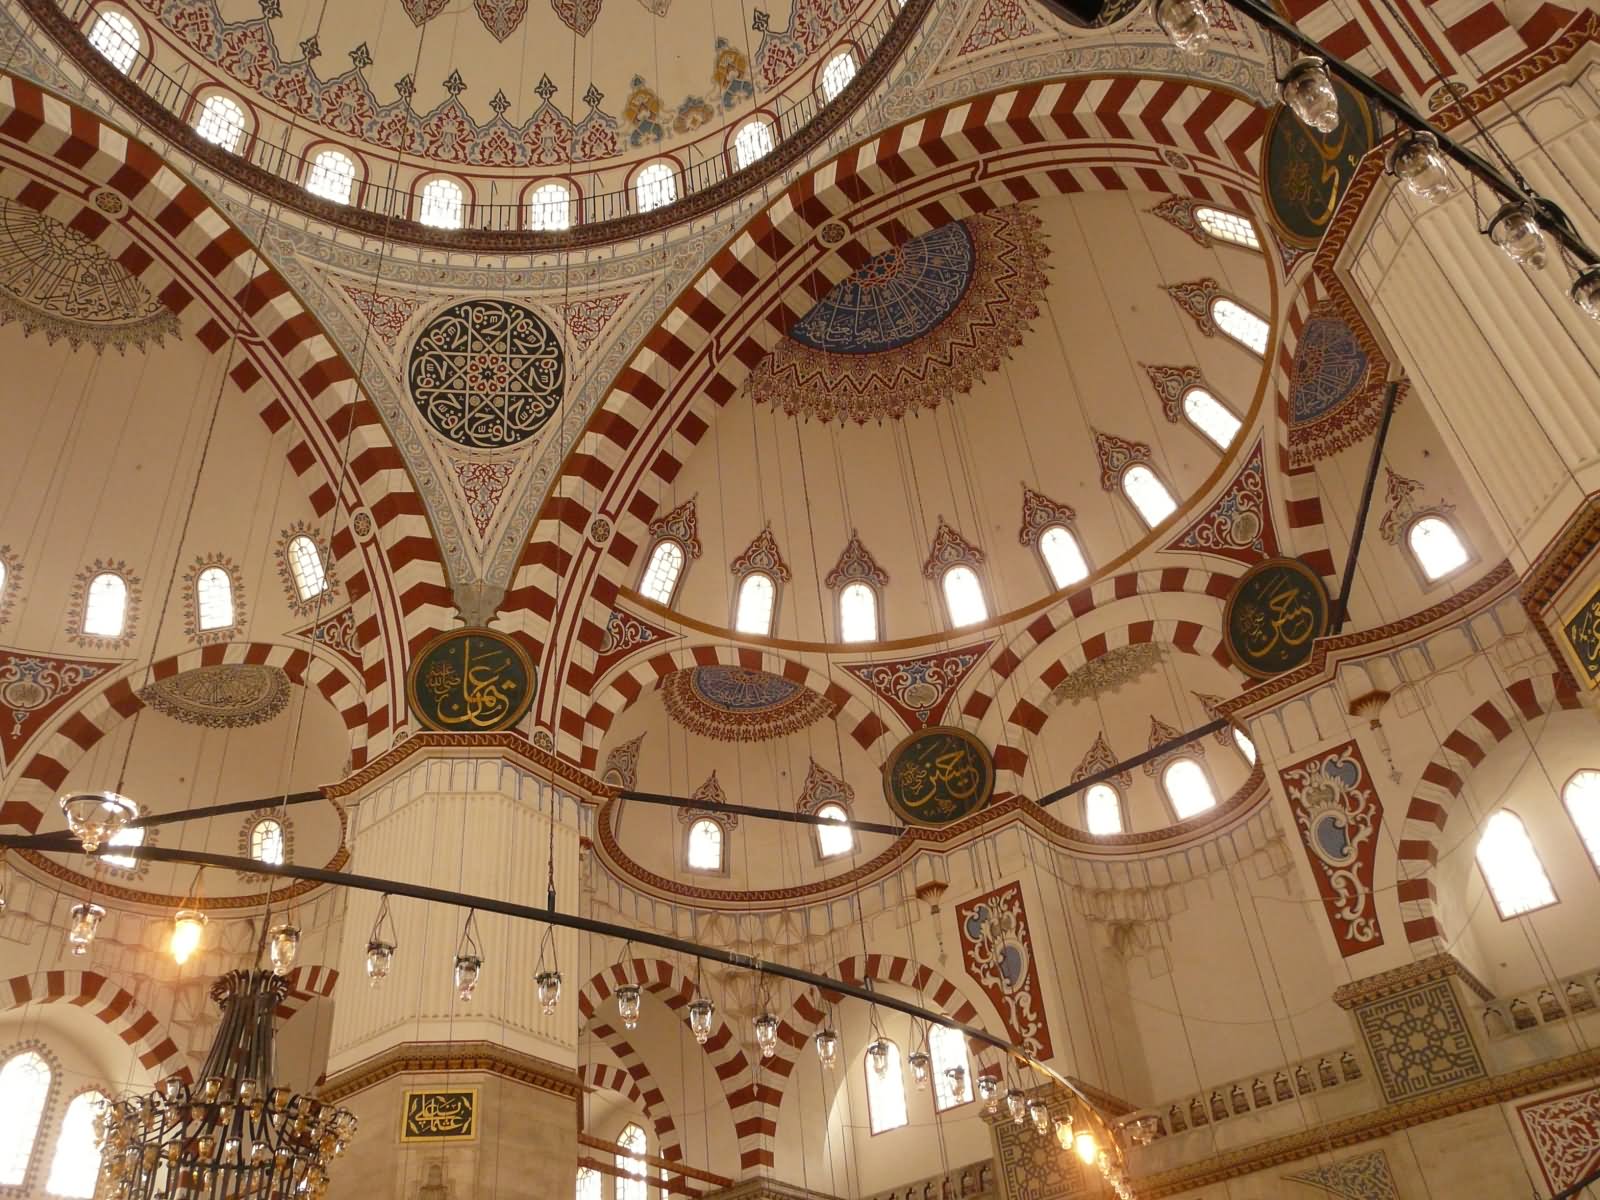 Inside Image Of The Sehzade Mosque In Istanbul